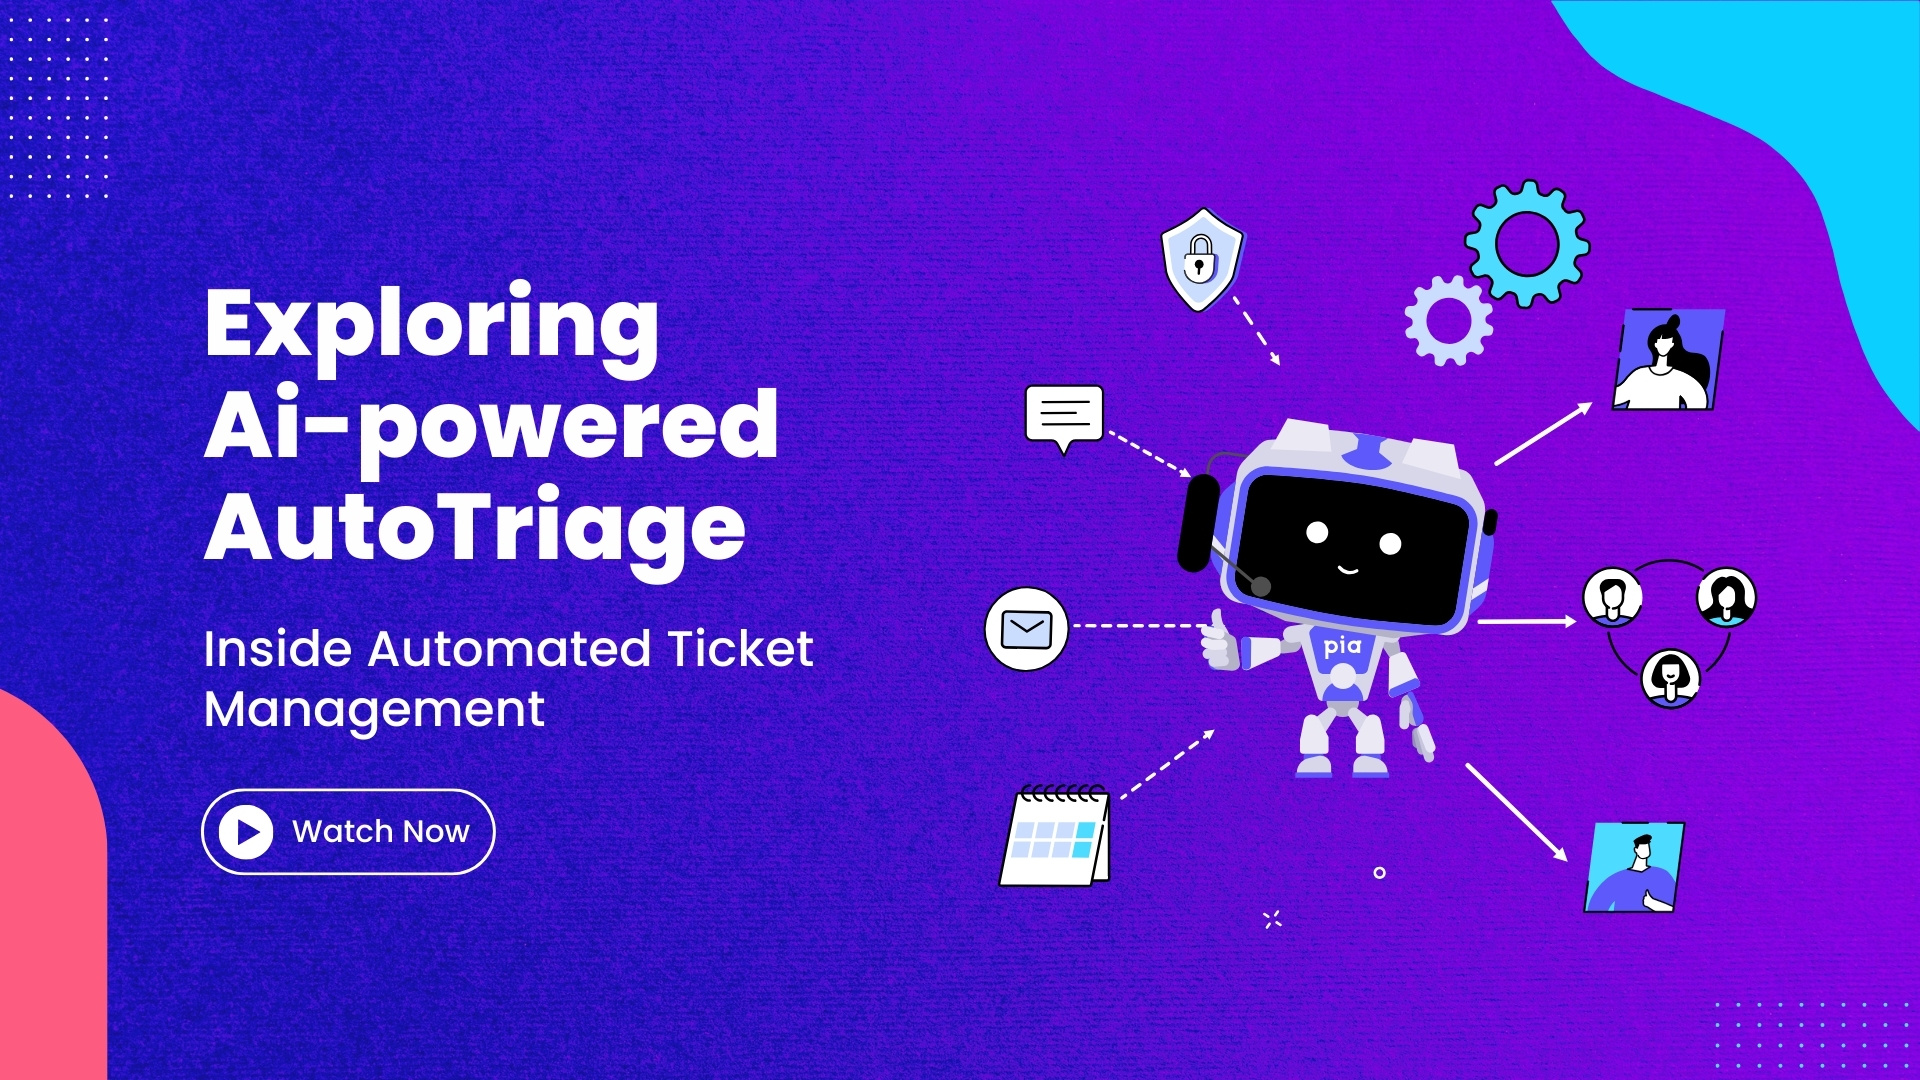 Exploring AI-powered AutoTriage Inside Automated Ticket Management